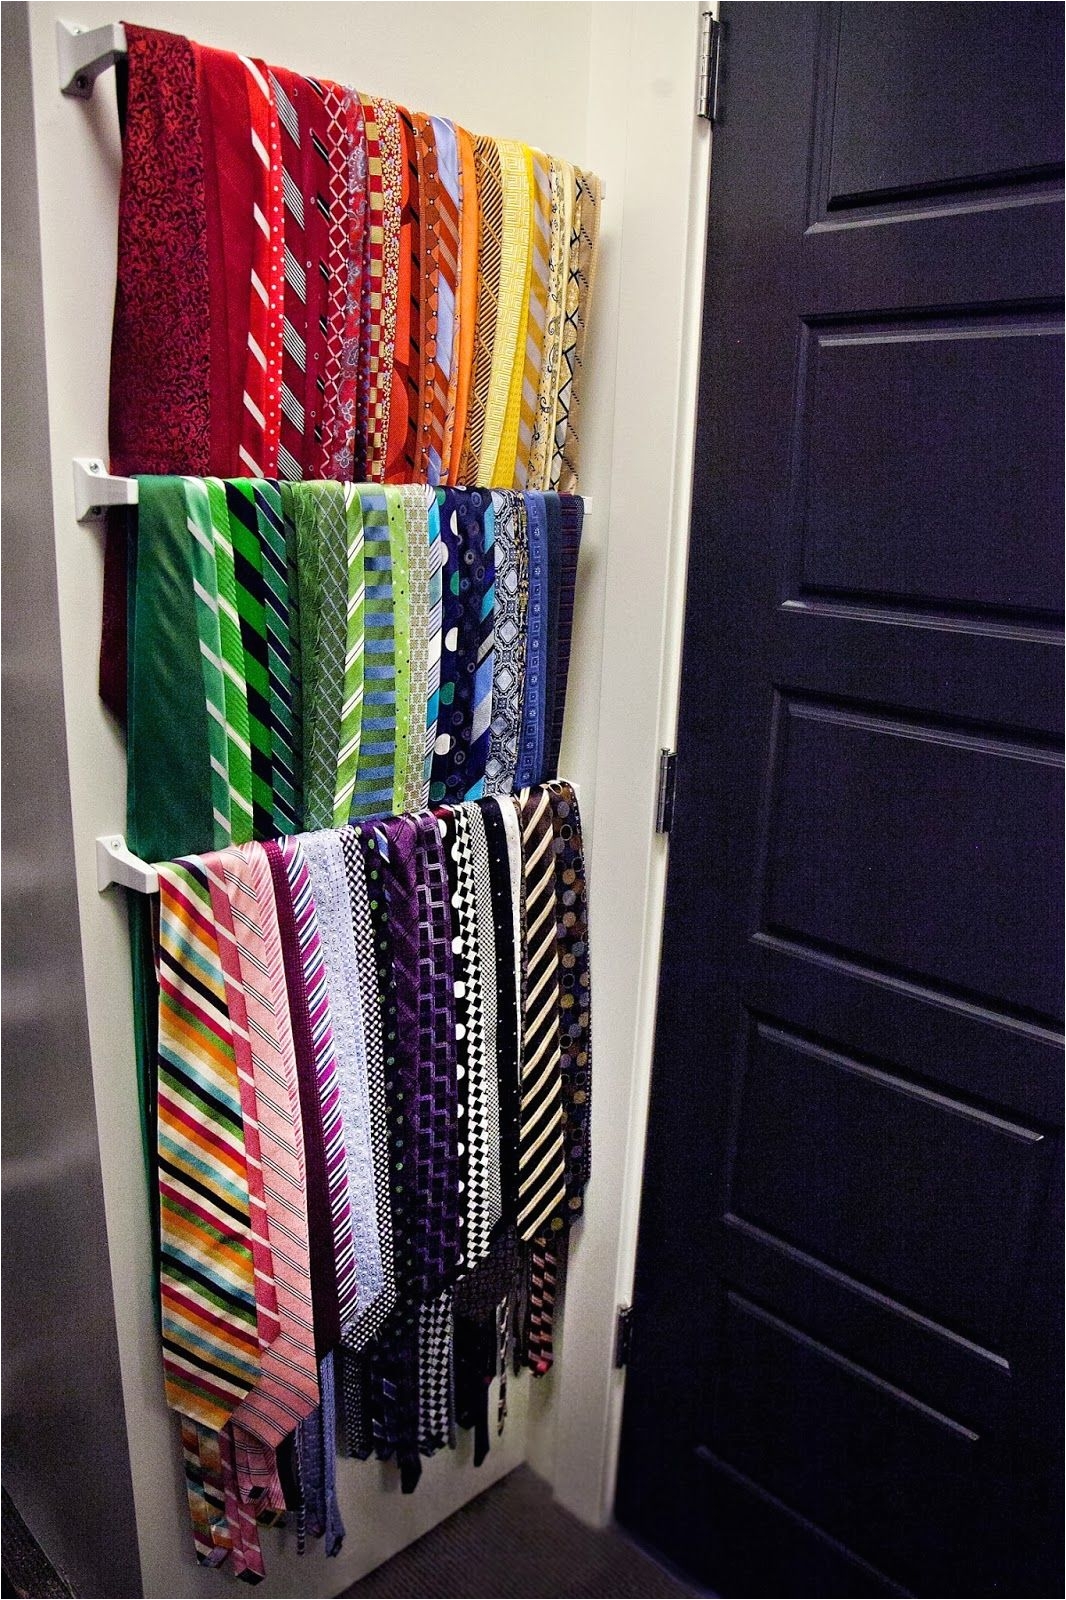 Homemade Tie Rack towell Bar for Shallow Storage Ties Scarfs these Could Be